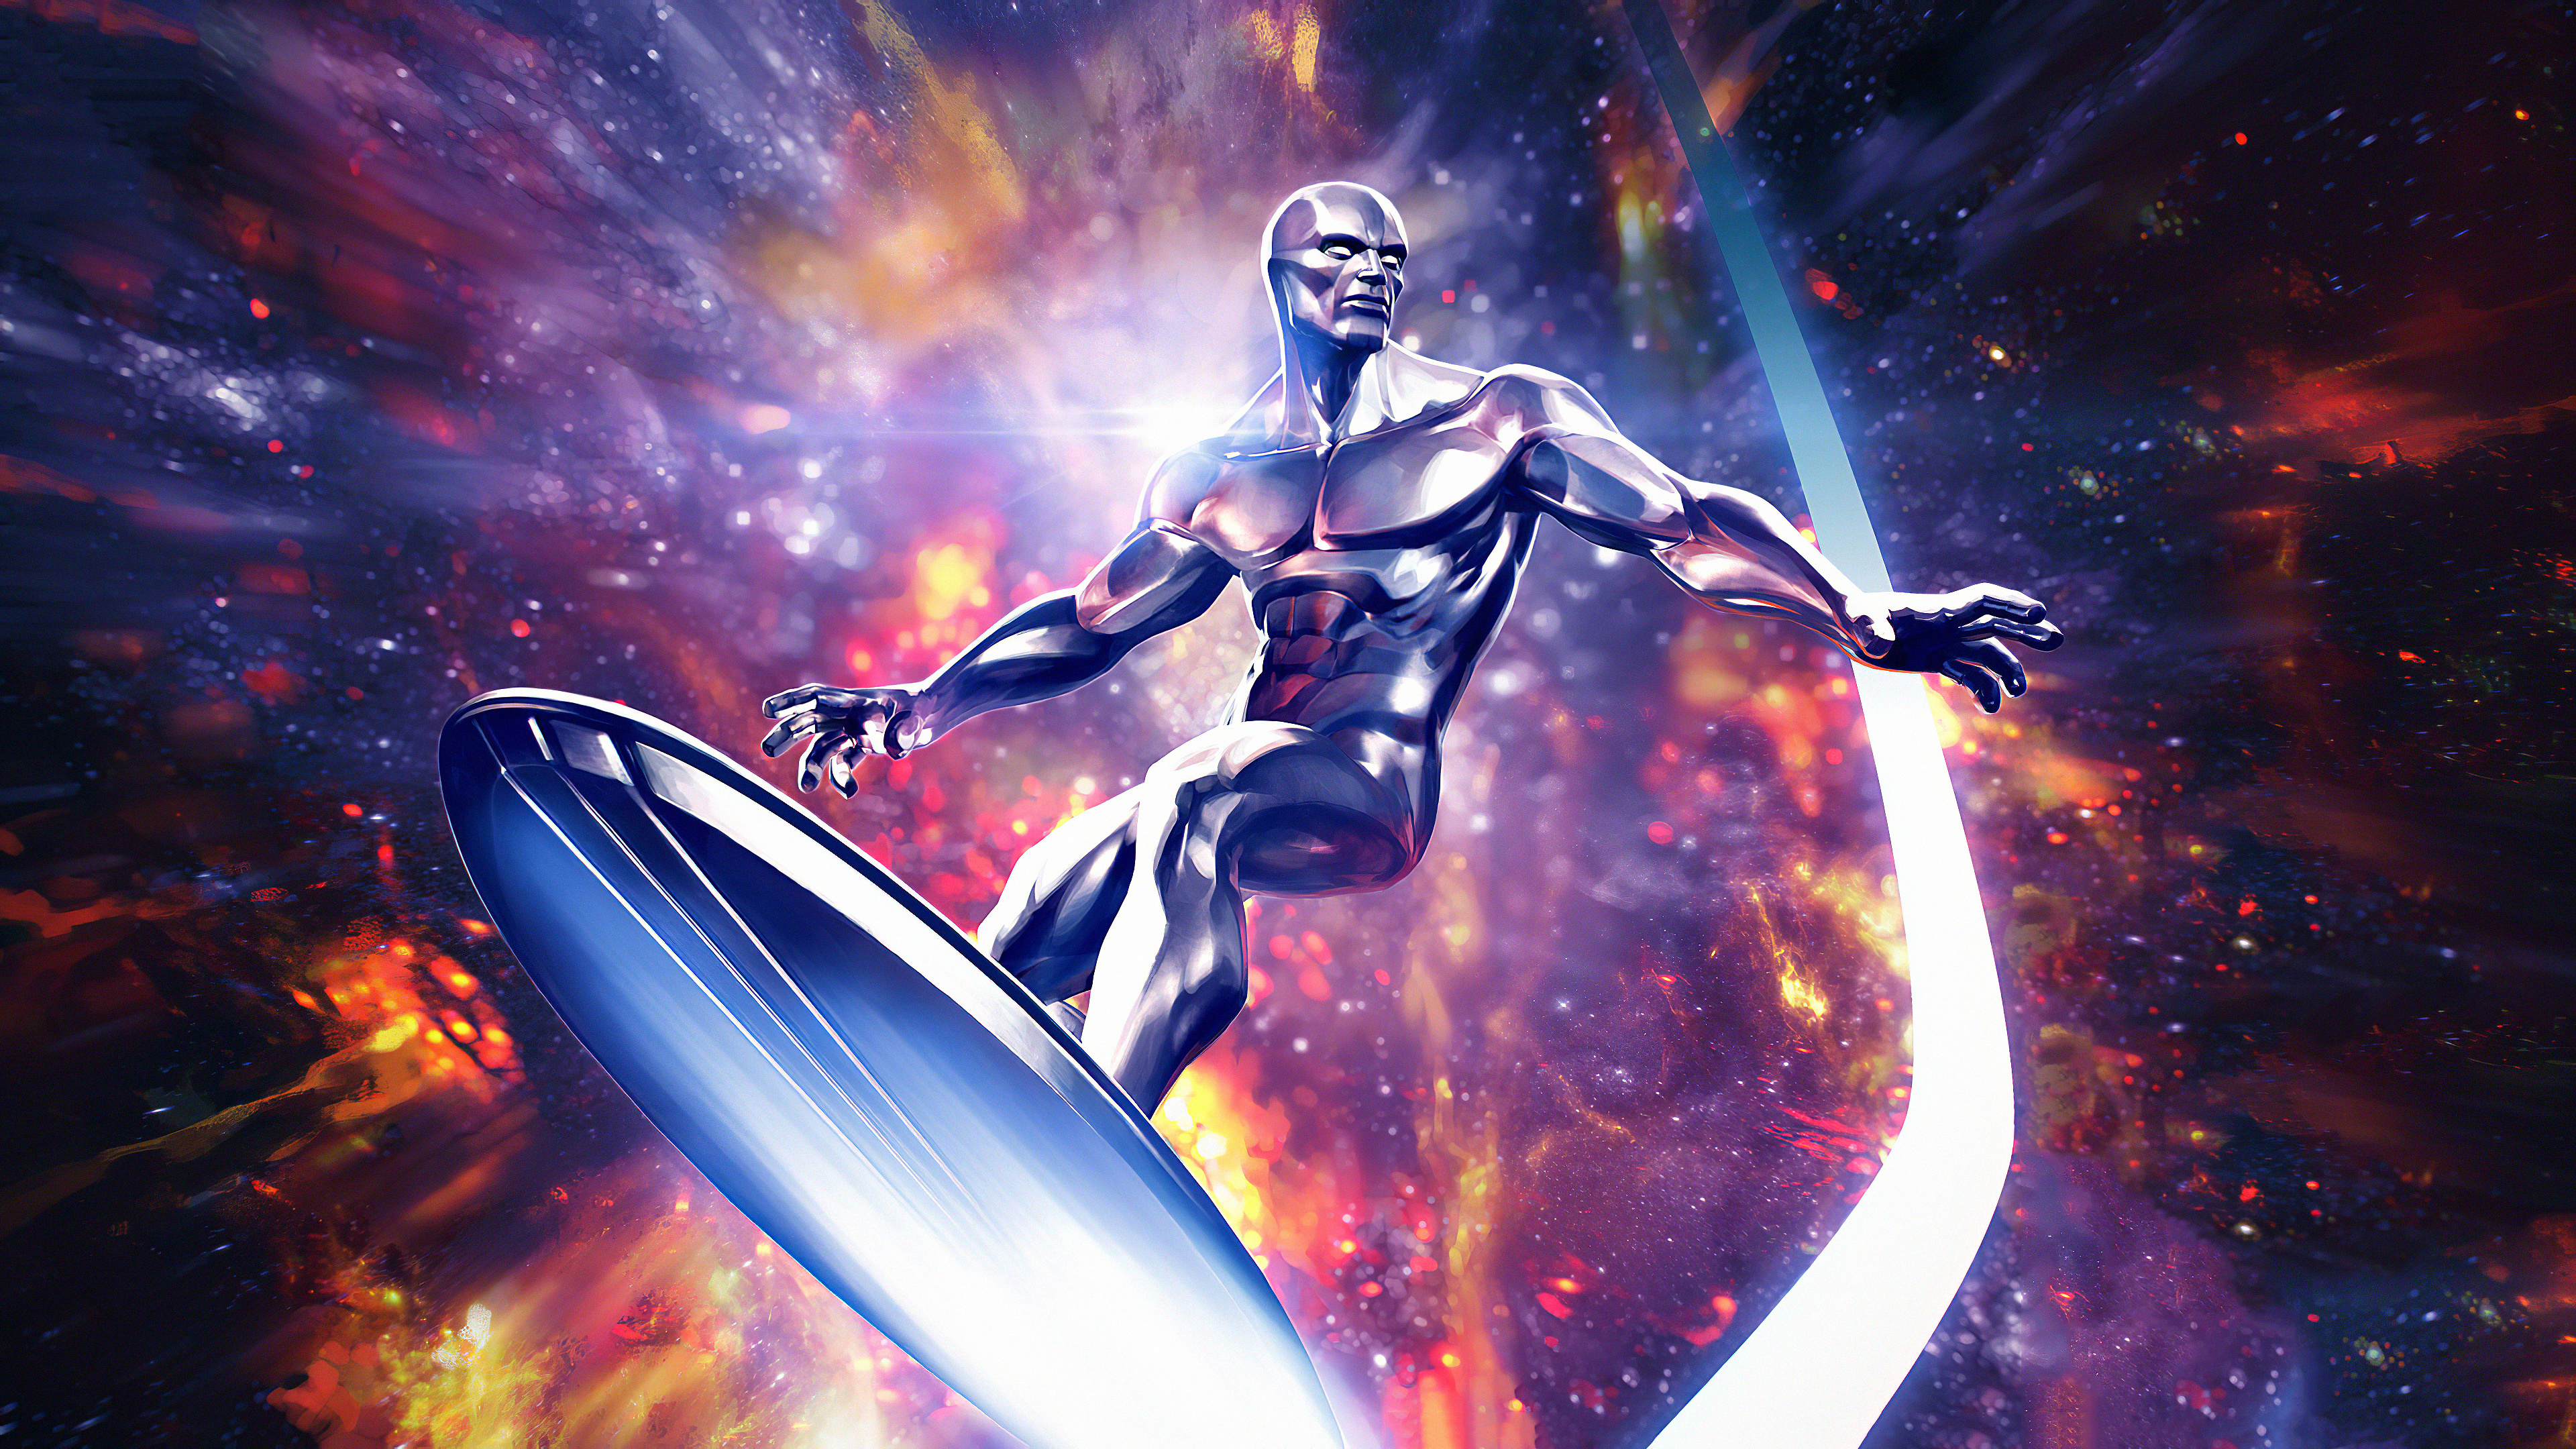 Marvel Contest of Champions, Silver Surfer in-game, 4K wallpapers, Gaming images, 3840x2160 4K Desktop